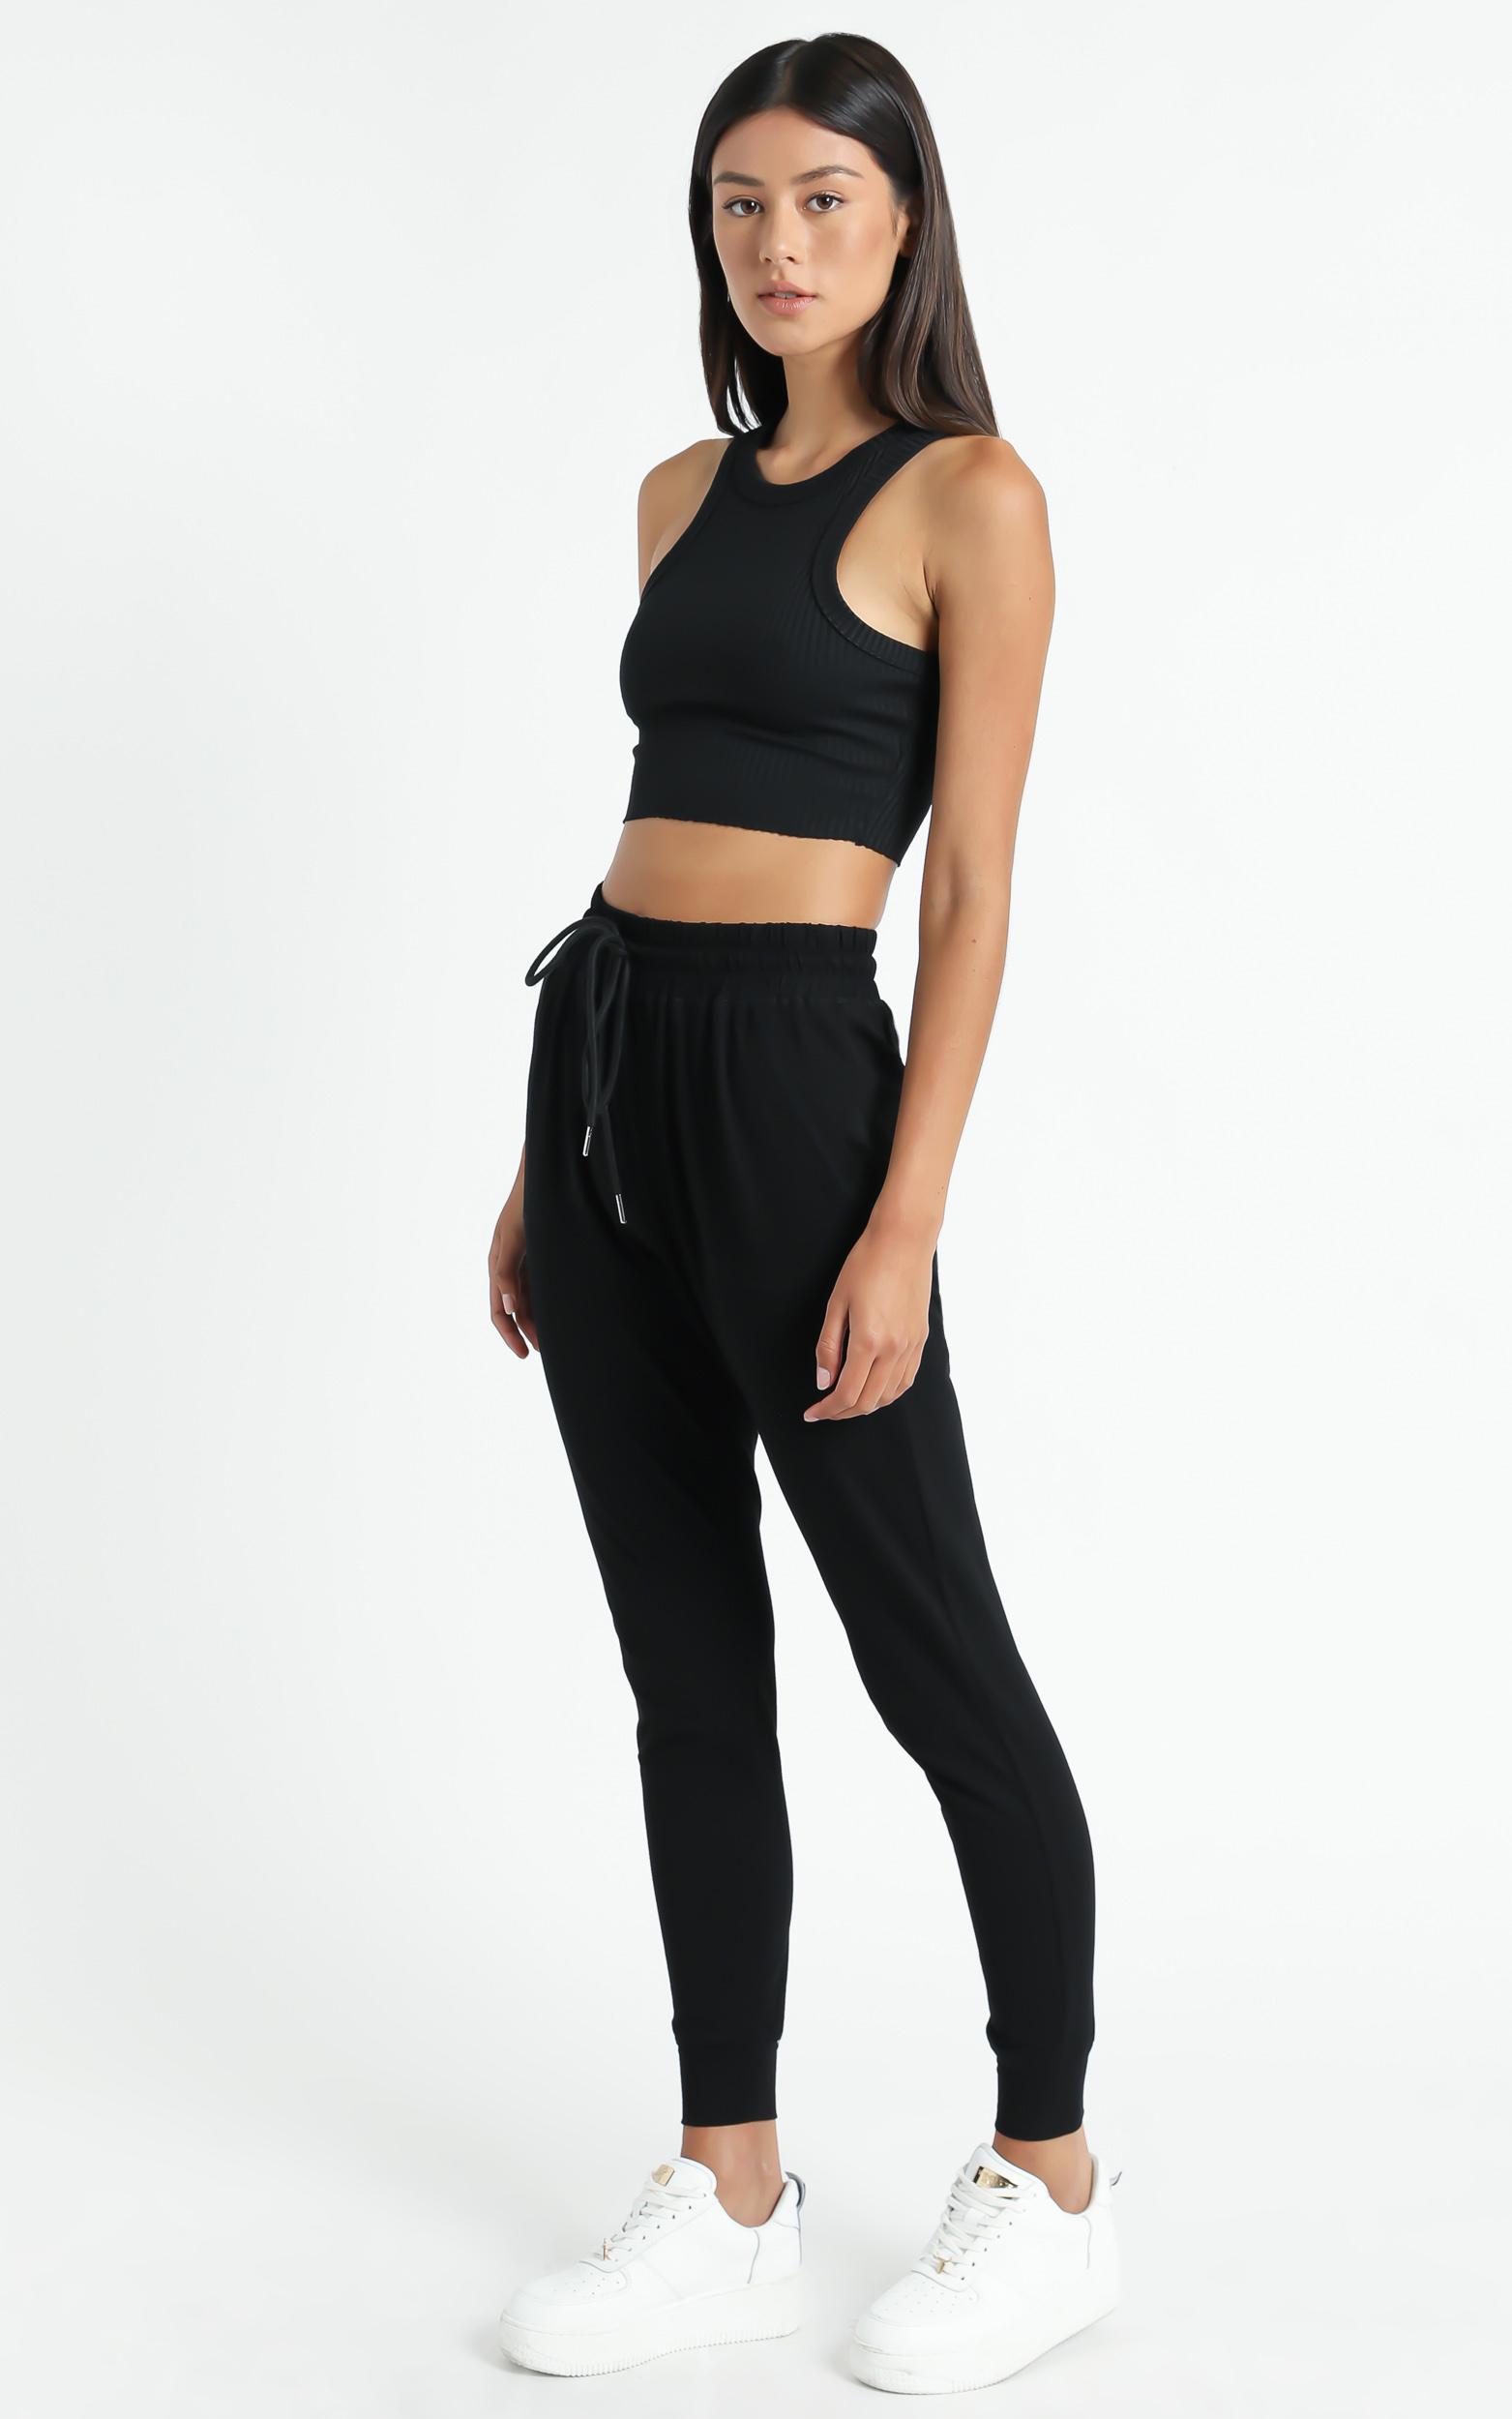 Made For This Pants In Black - 20 (XXXXL), Black, hi-res image number null